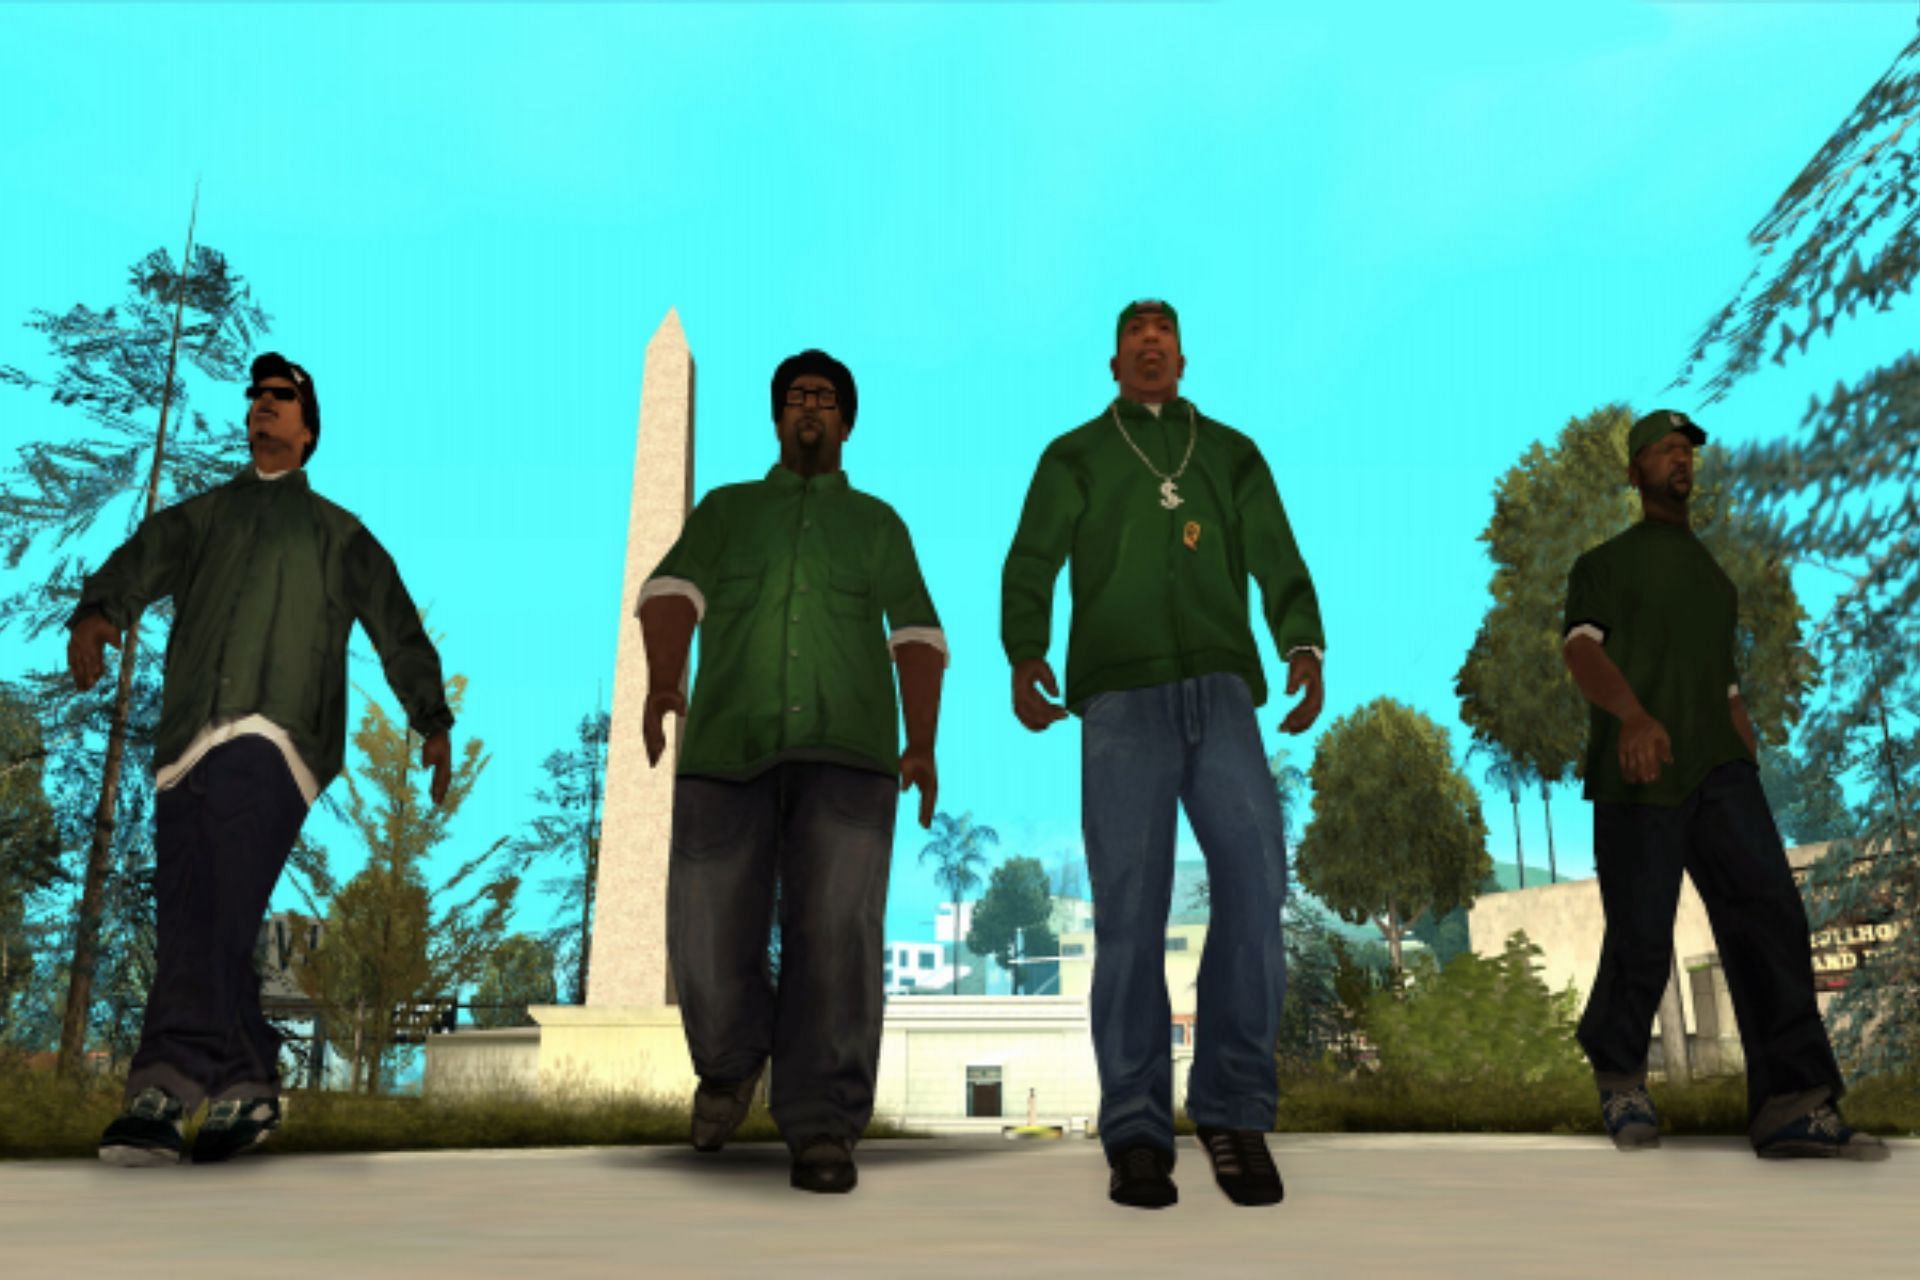 Grove Street Families is an iconic gang in this series (Images via Sportskeeda)